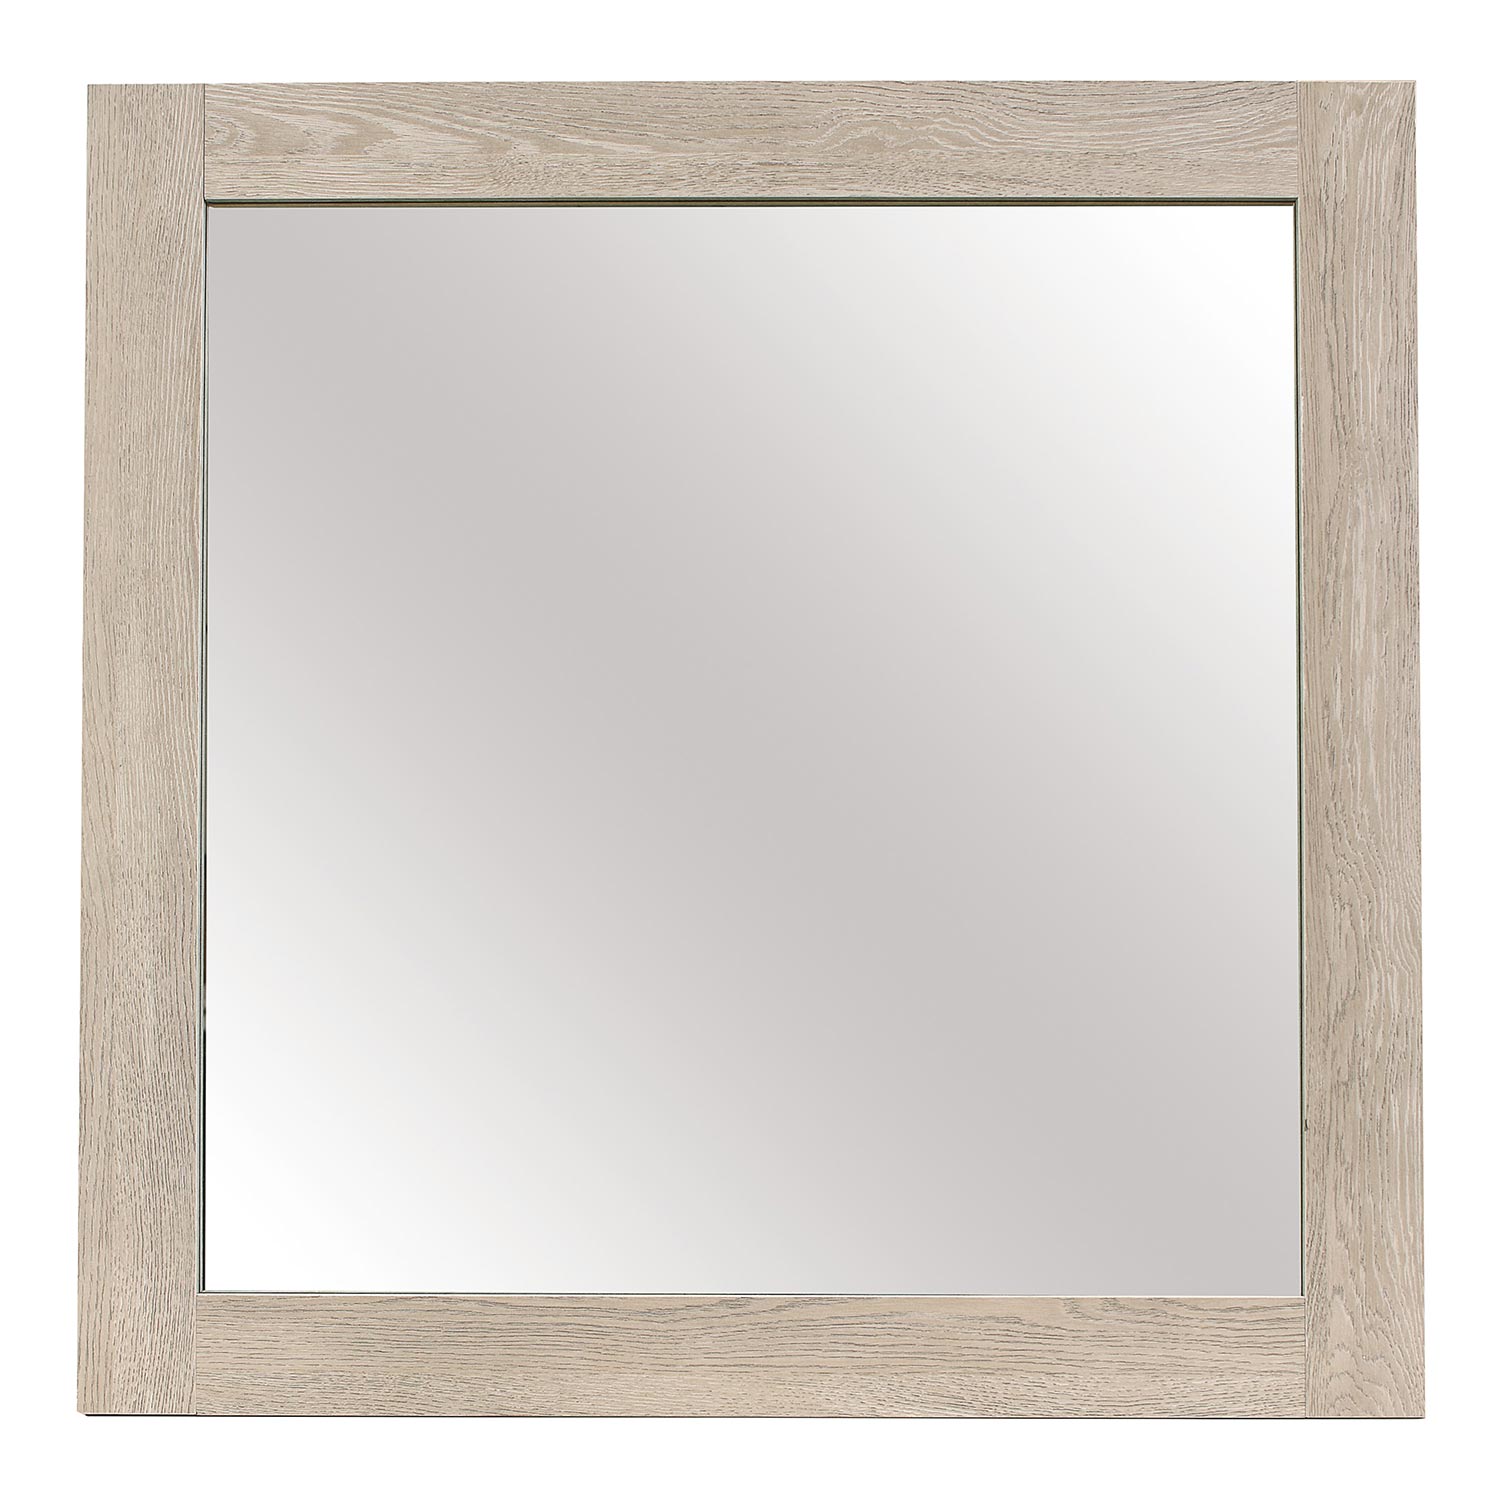 Homelegance Whiting Mirror - Cream and Black